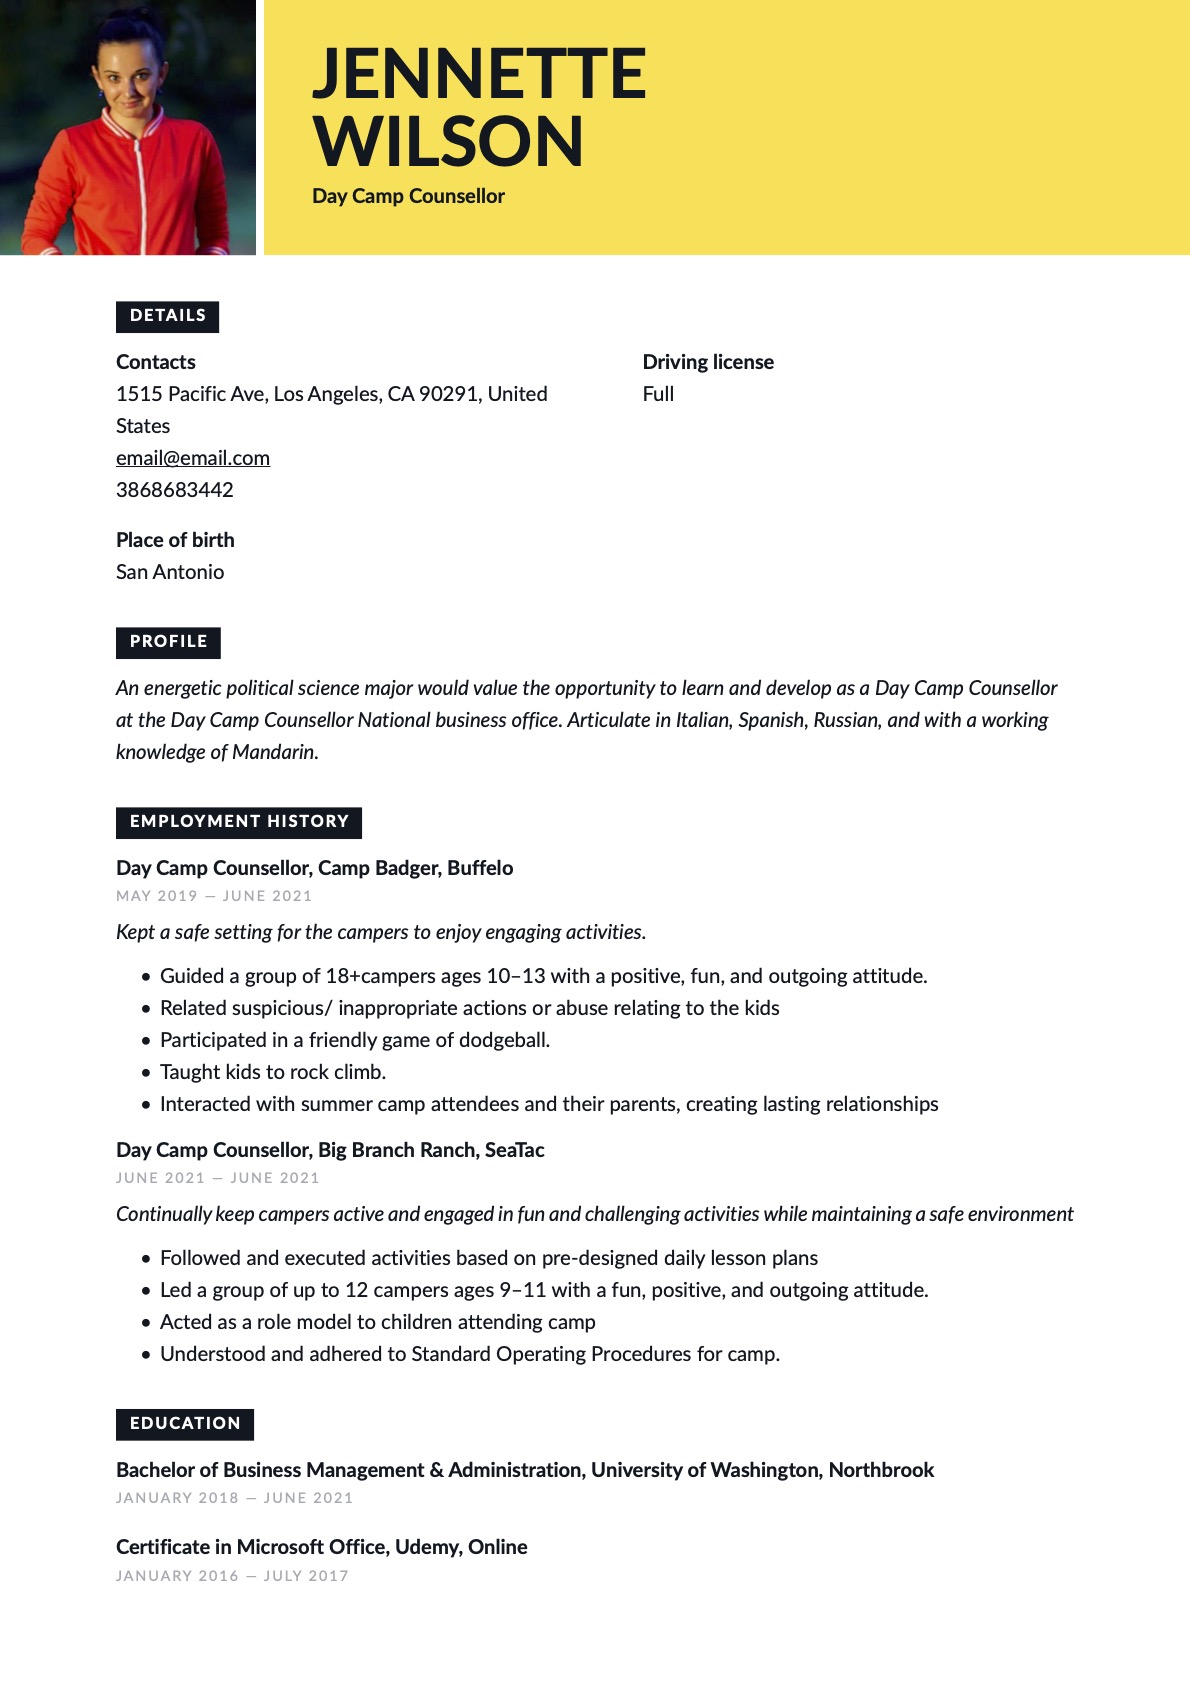 Day Camp Counselor Resume Template